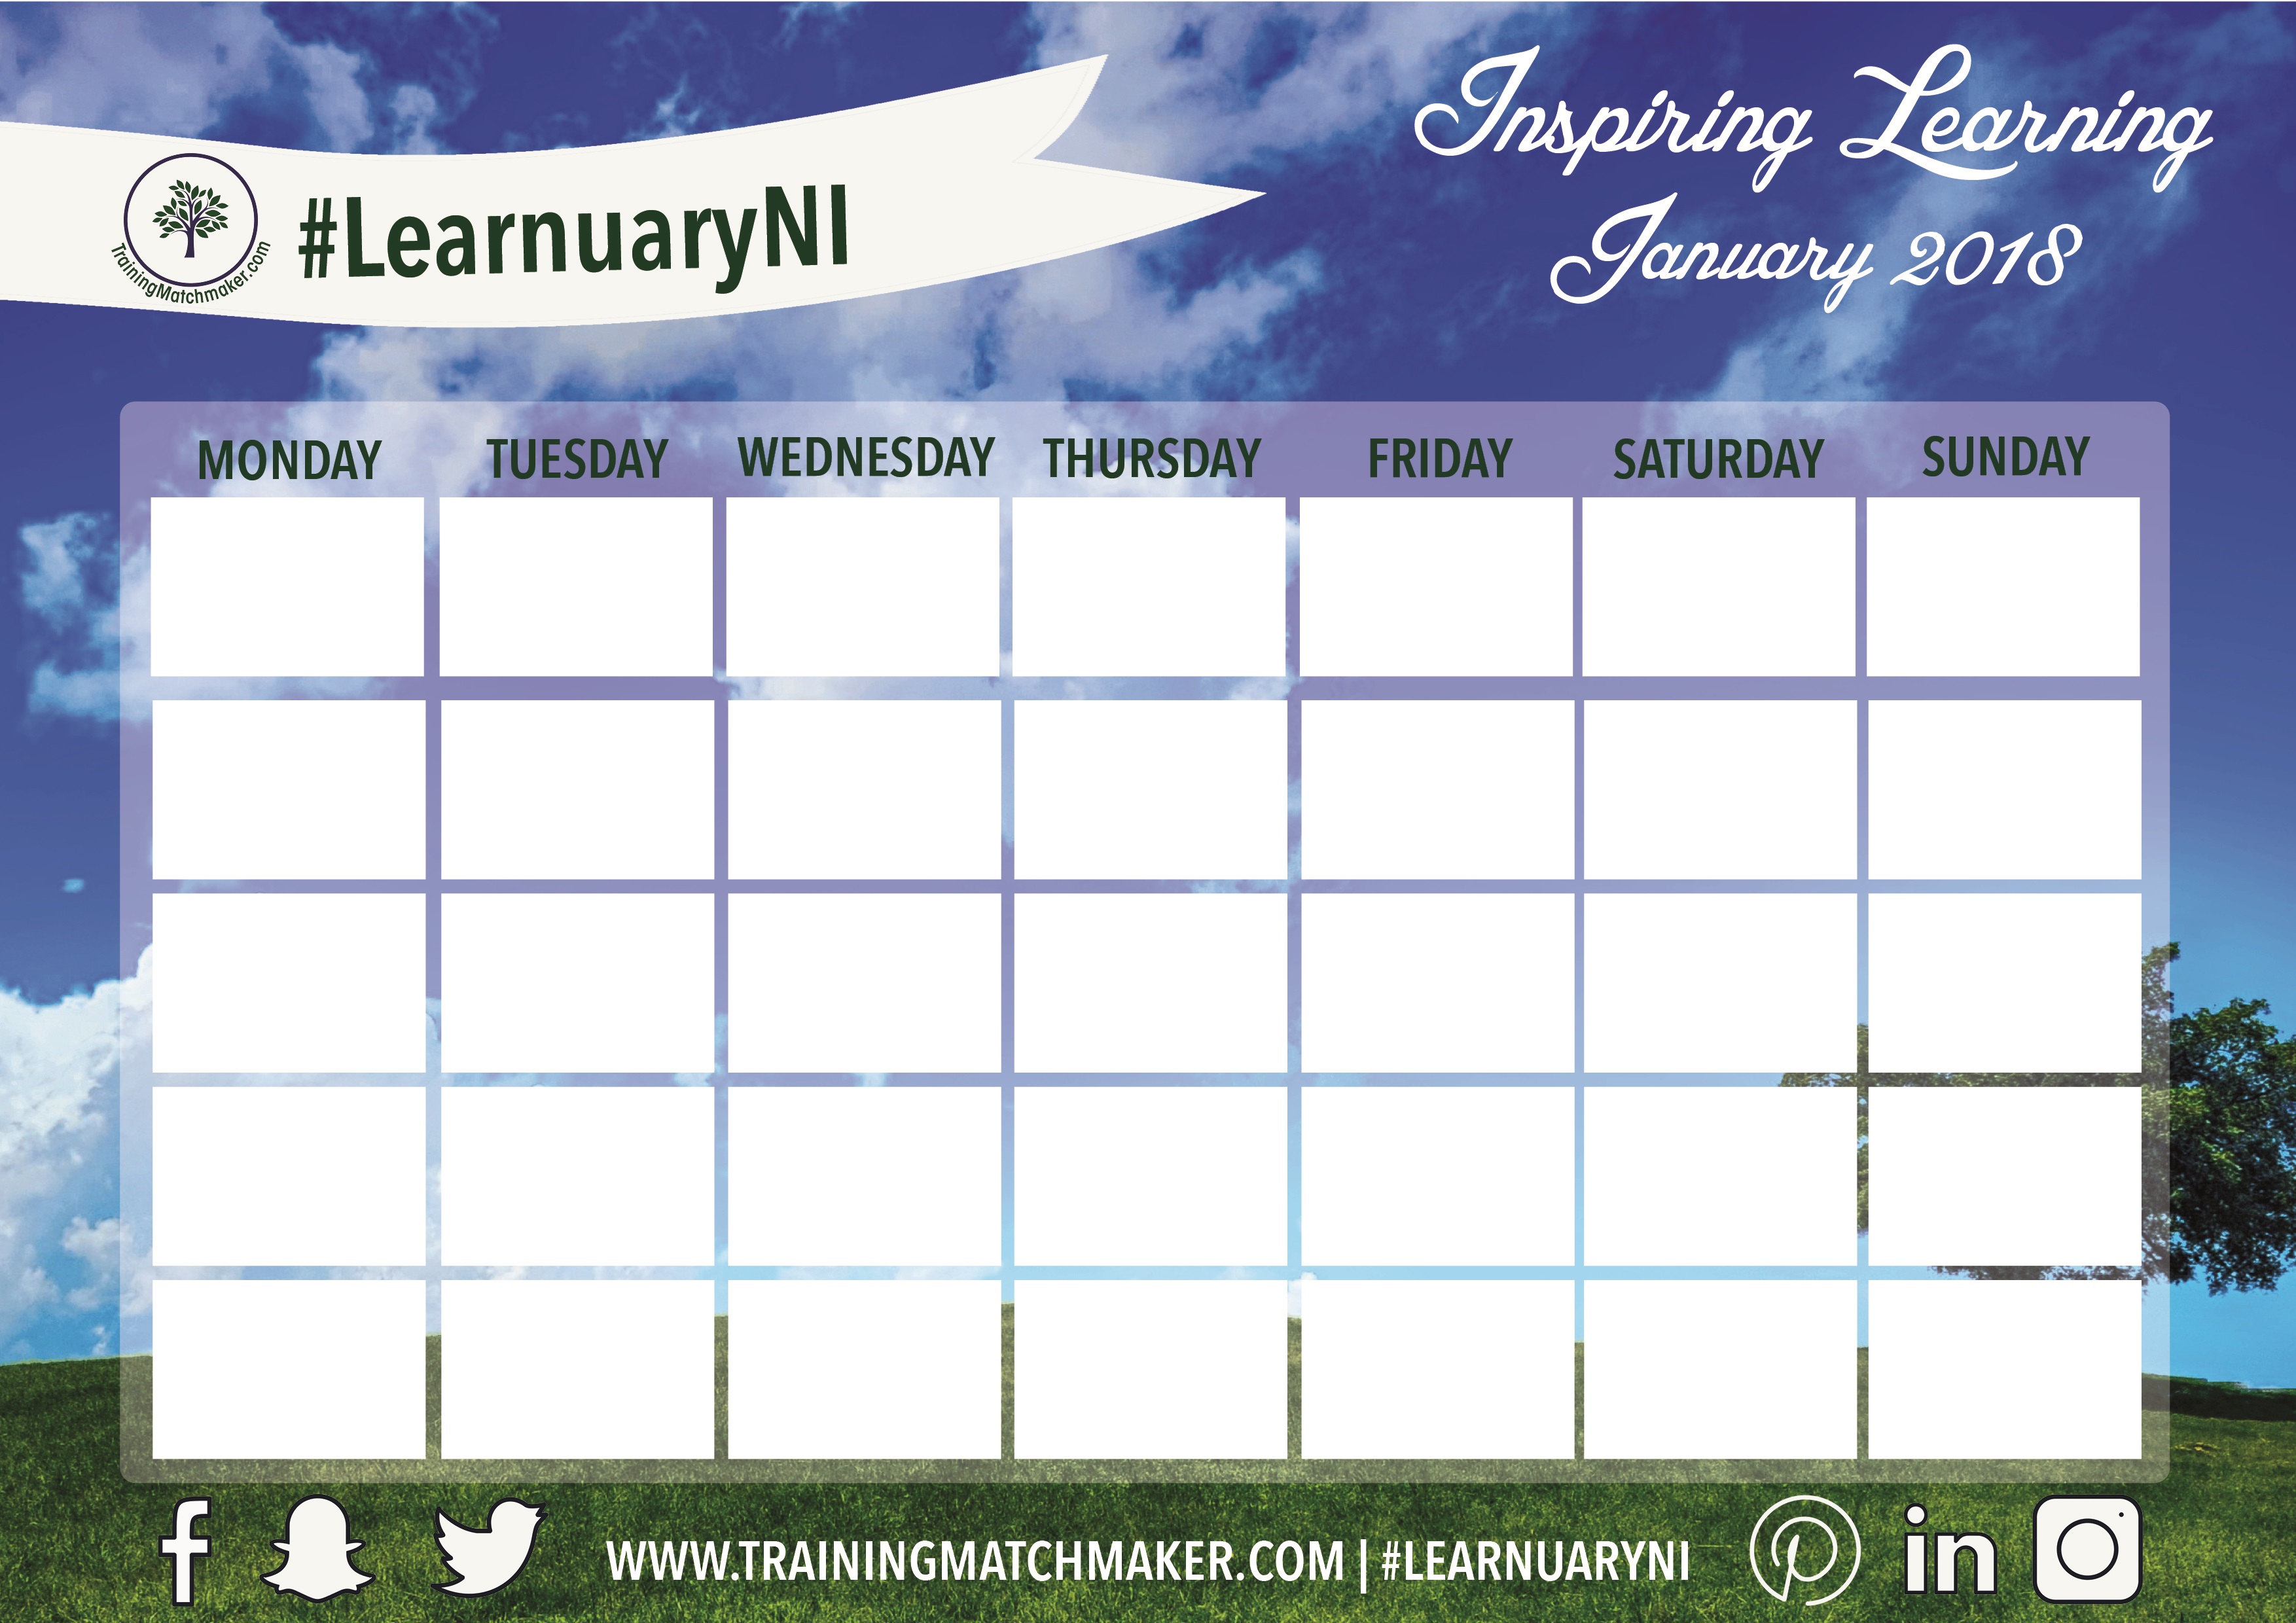 Plan your #LearnuaryNI quest using calendar template by TrainingMatchmaker.com